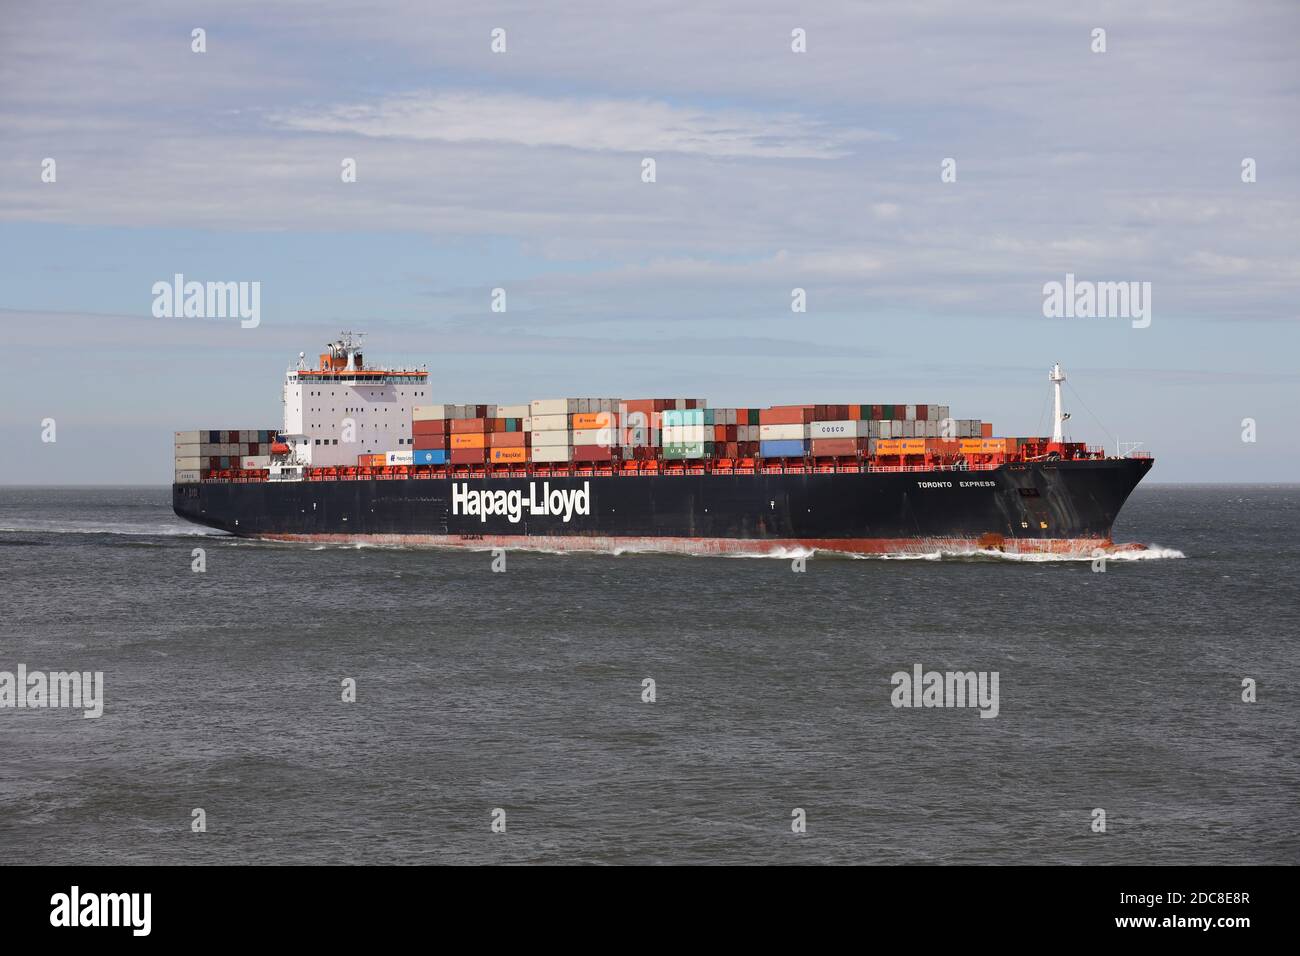 The container ship Toronto Express will pass Cuxhaven on August 21, 2020 on its way to Hamburg. Stock Photo